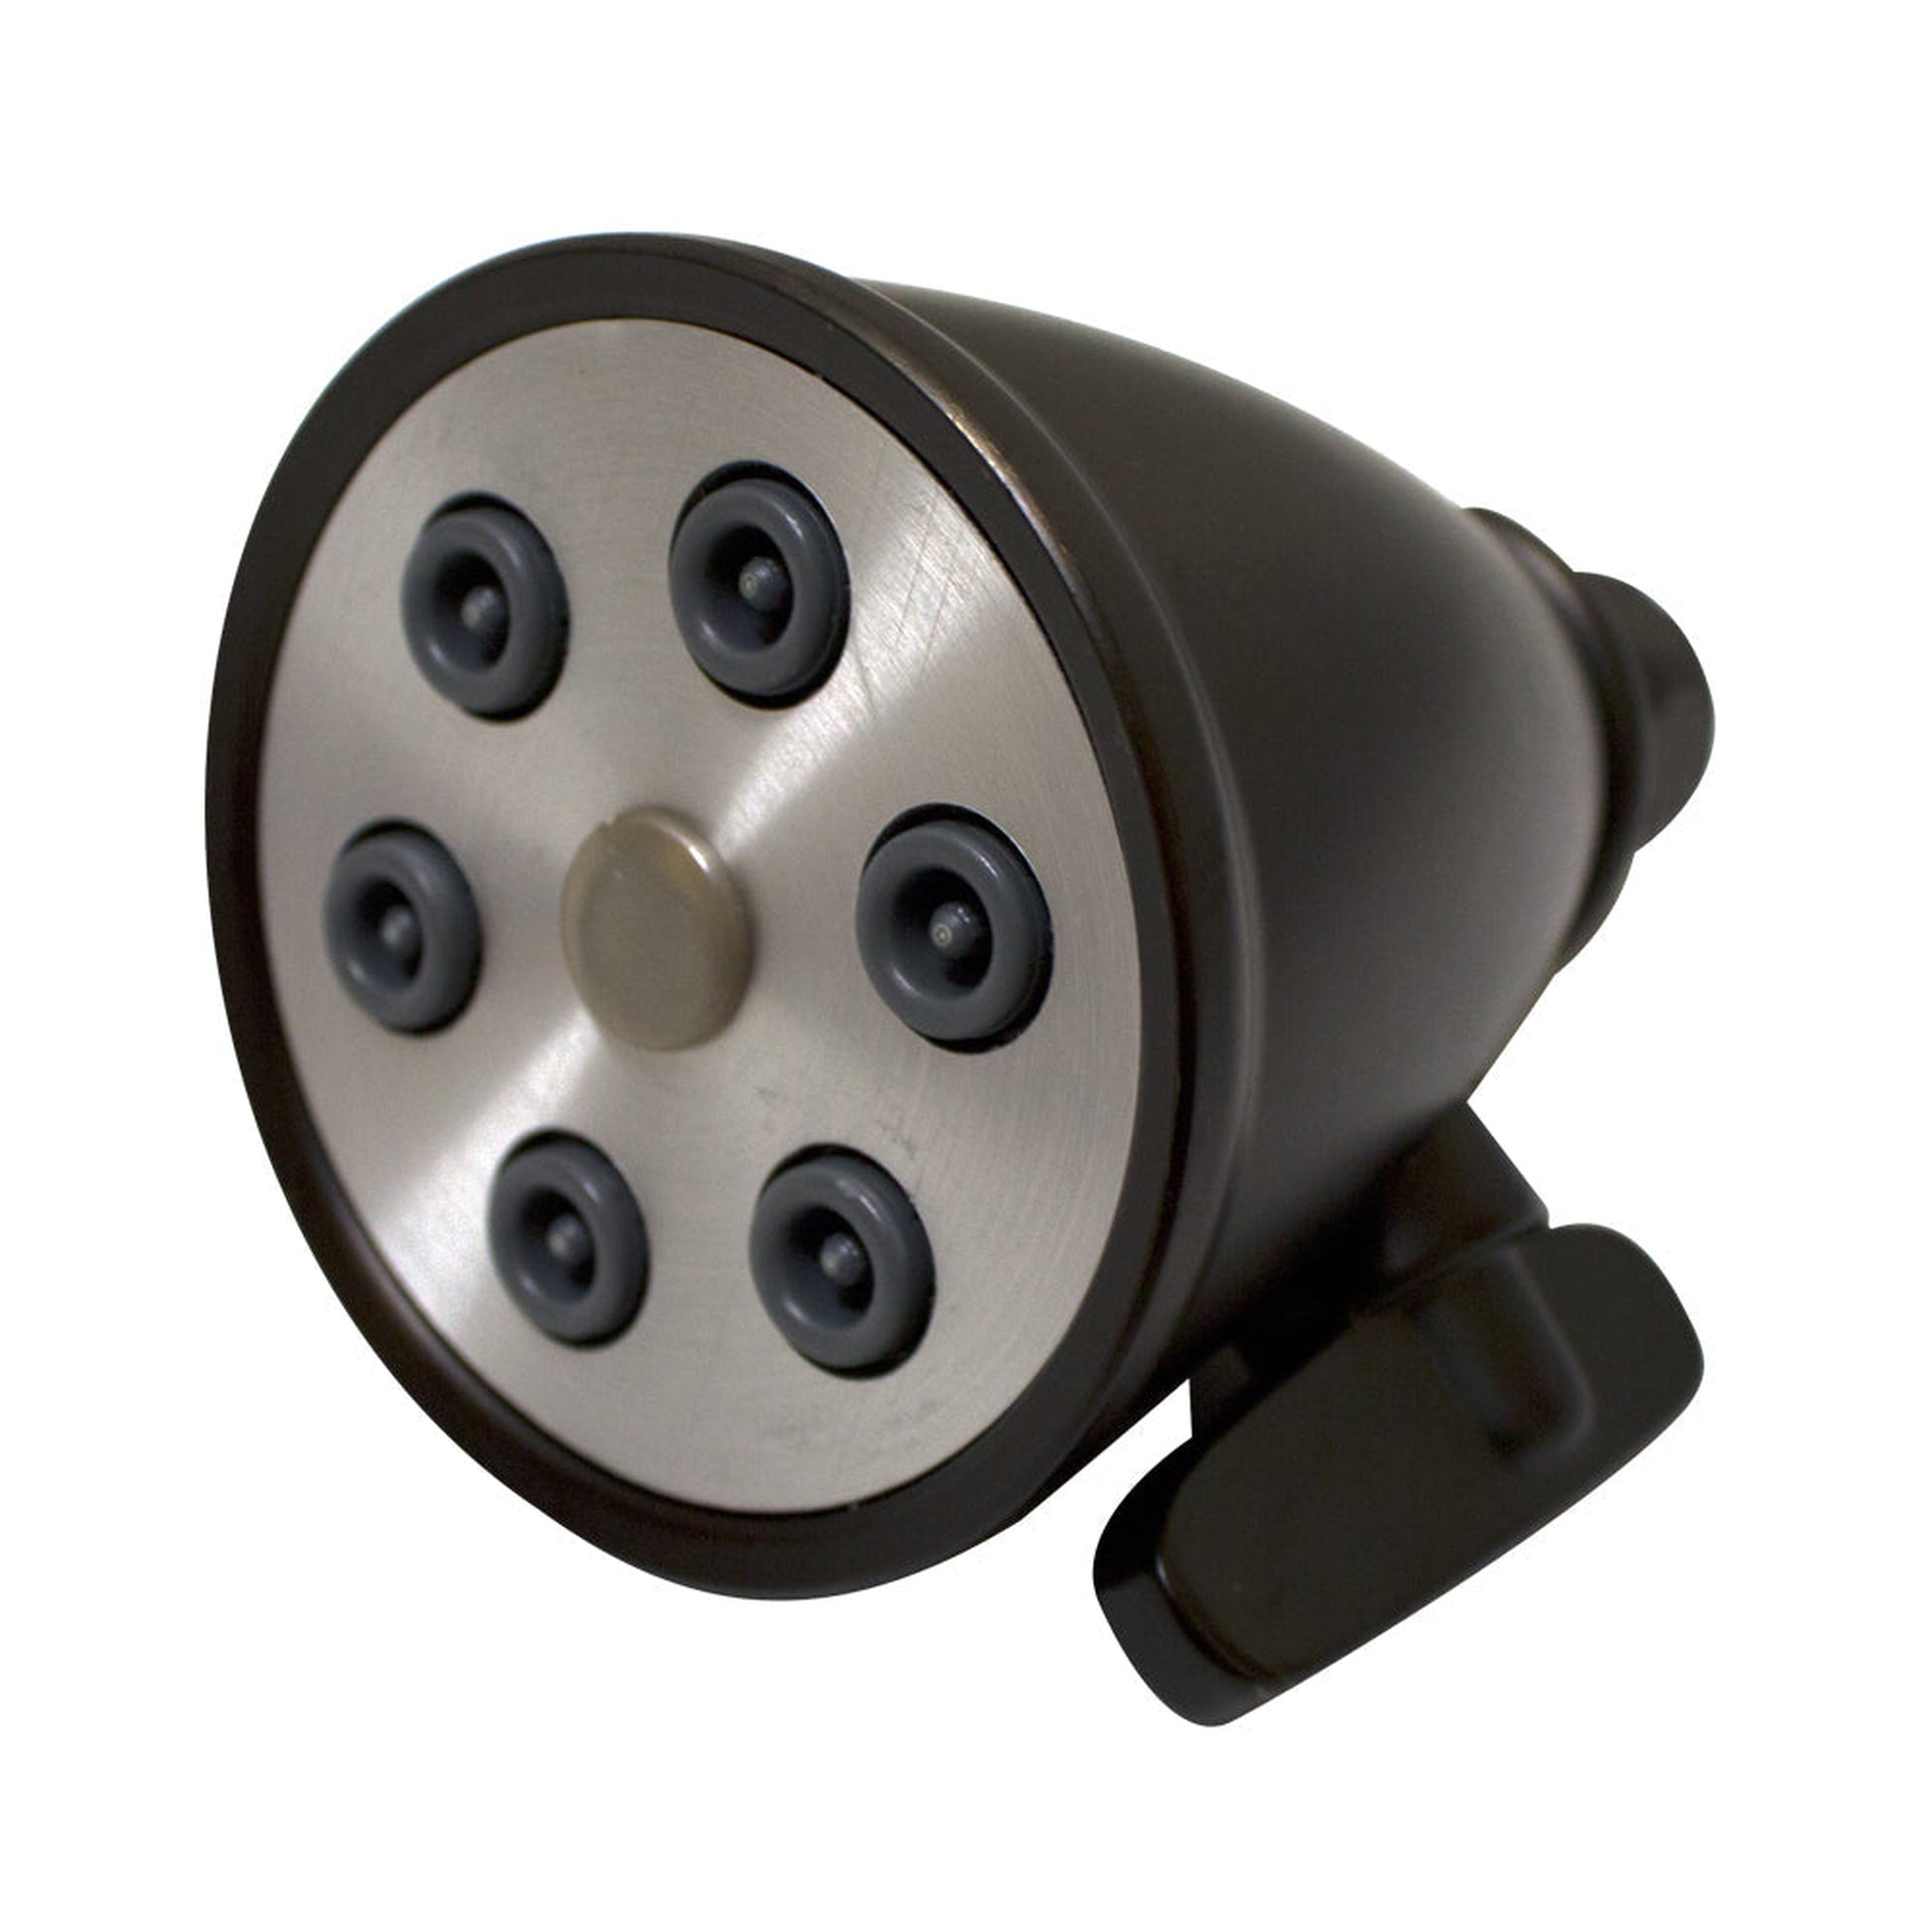 Whitehaus Showerhaus WH138-ORB Oil Rubbed Bronze Small Round Showerhead With 6 Spray Jets - Solid Brass Construction With Adjustable Ball Joint